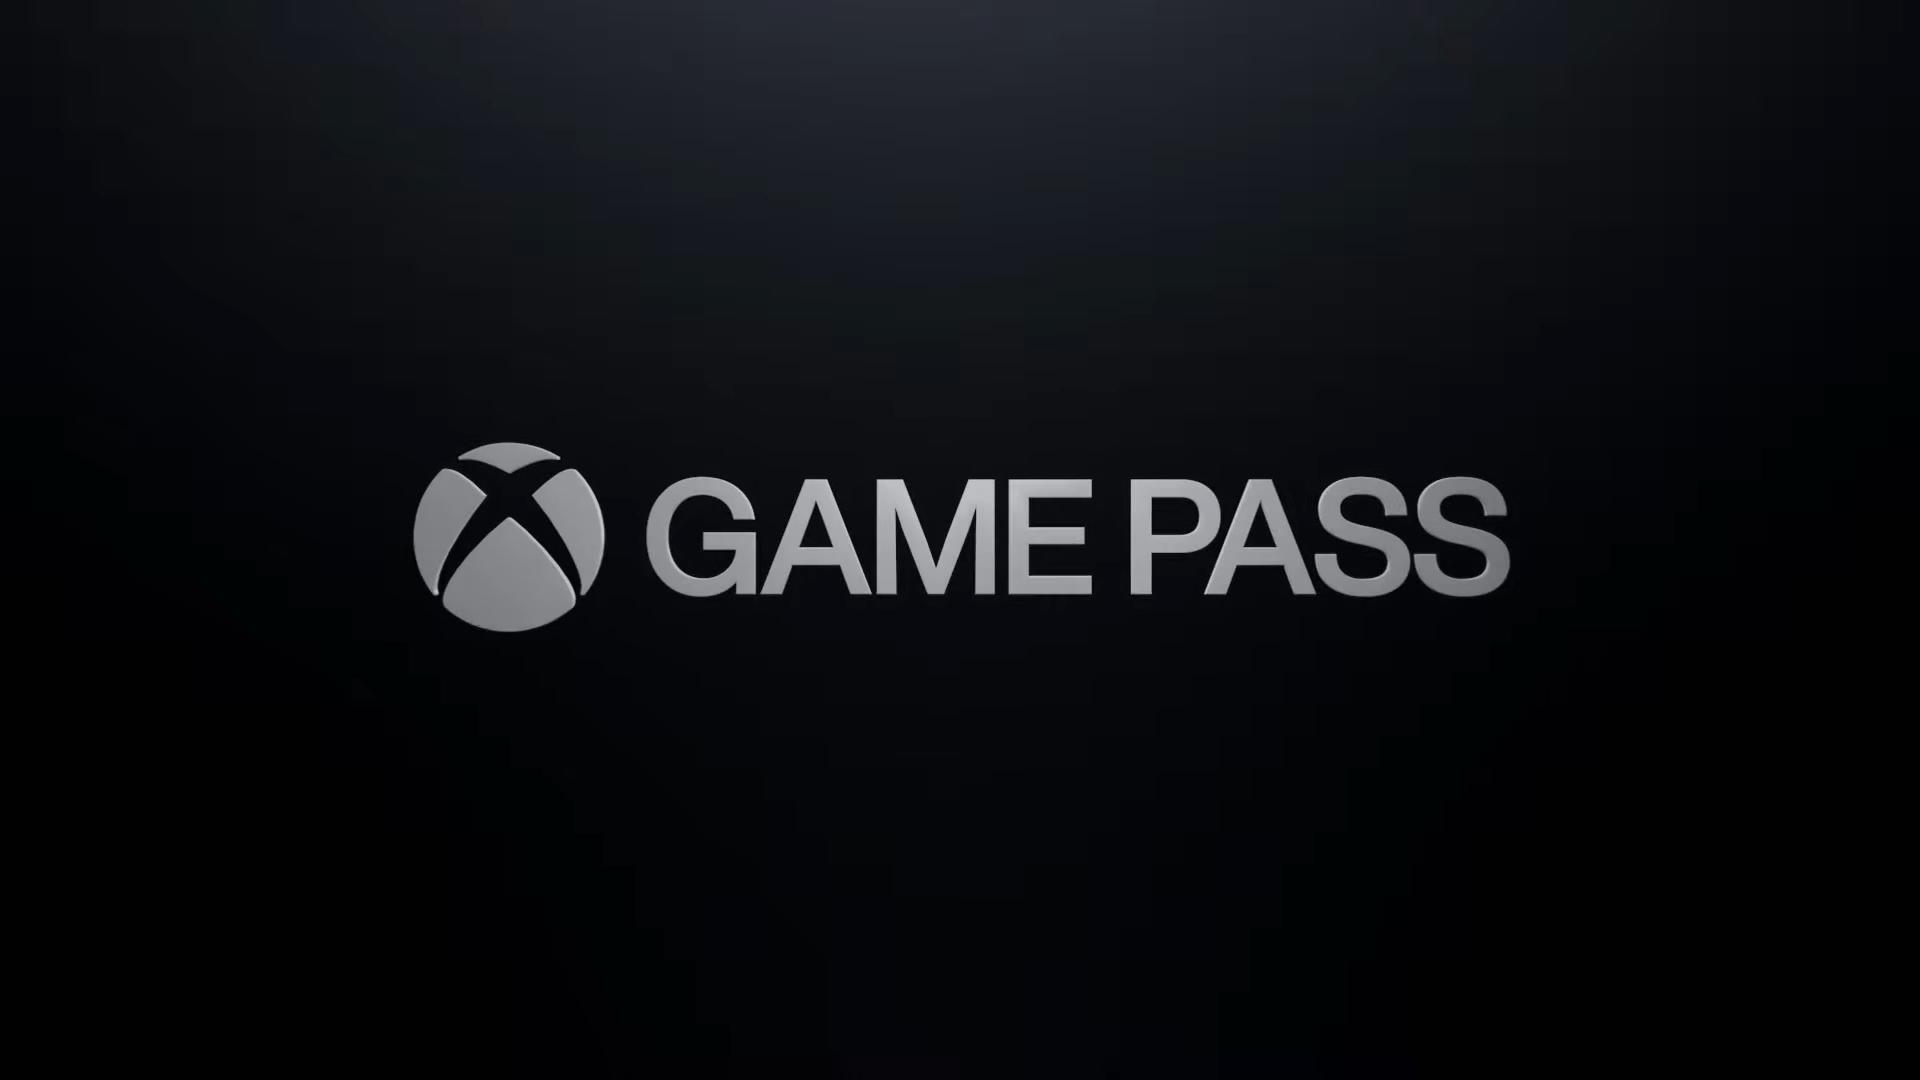 windows 10 game pass trial